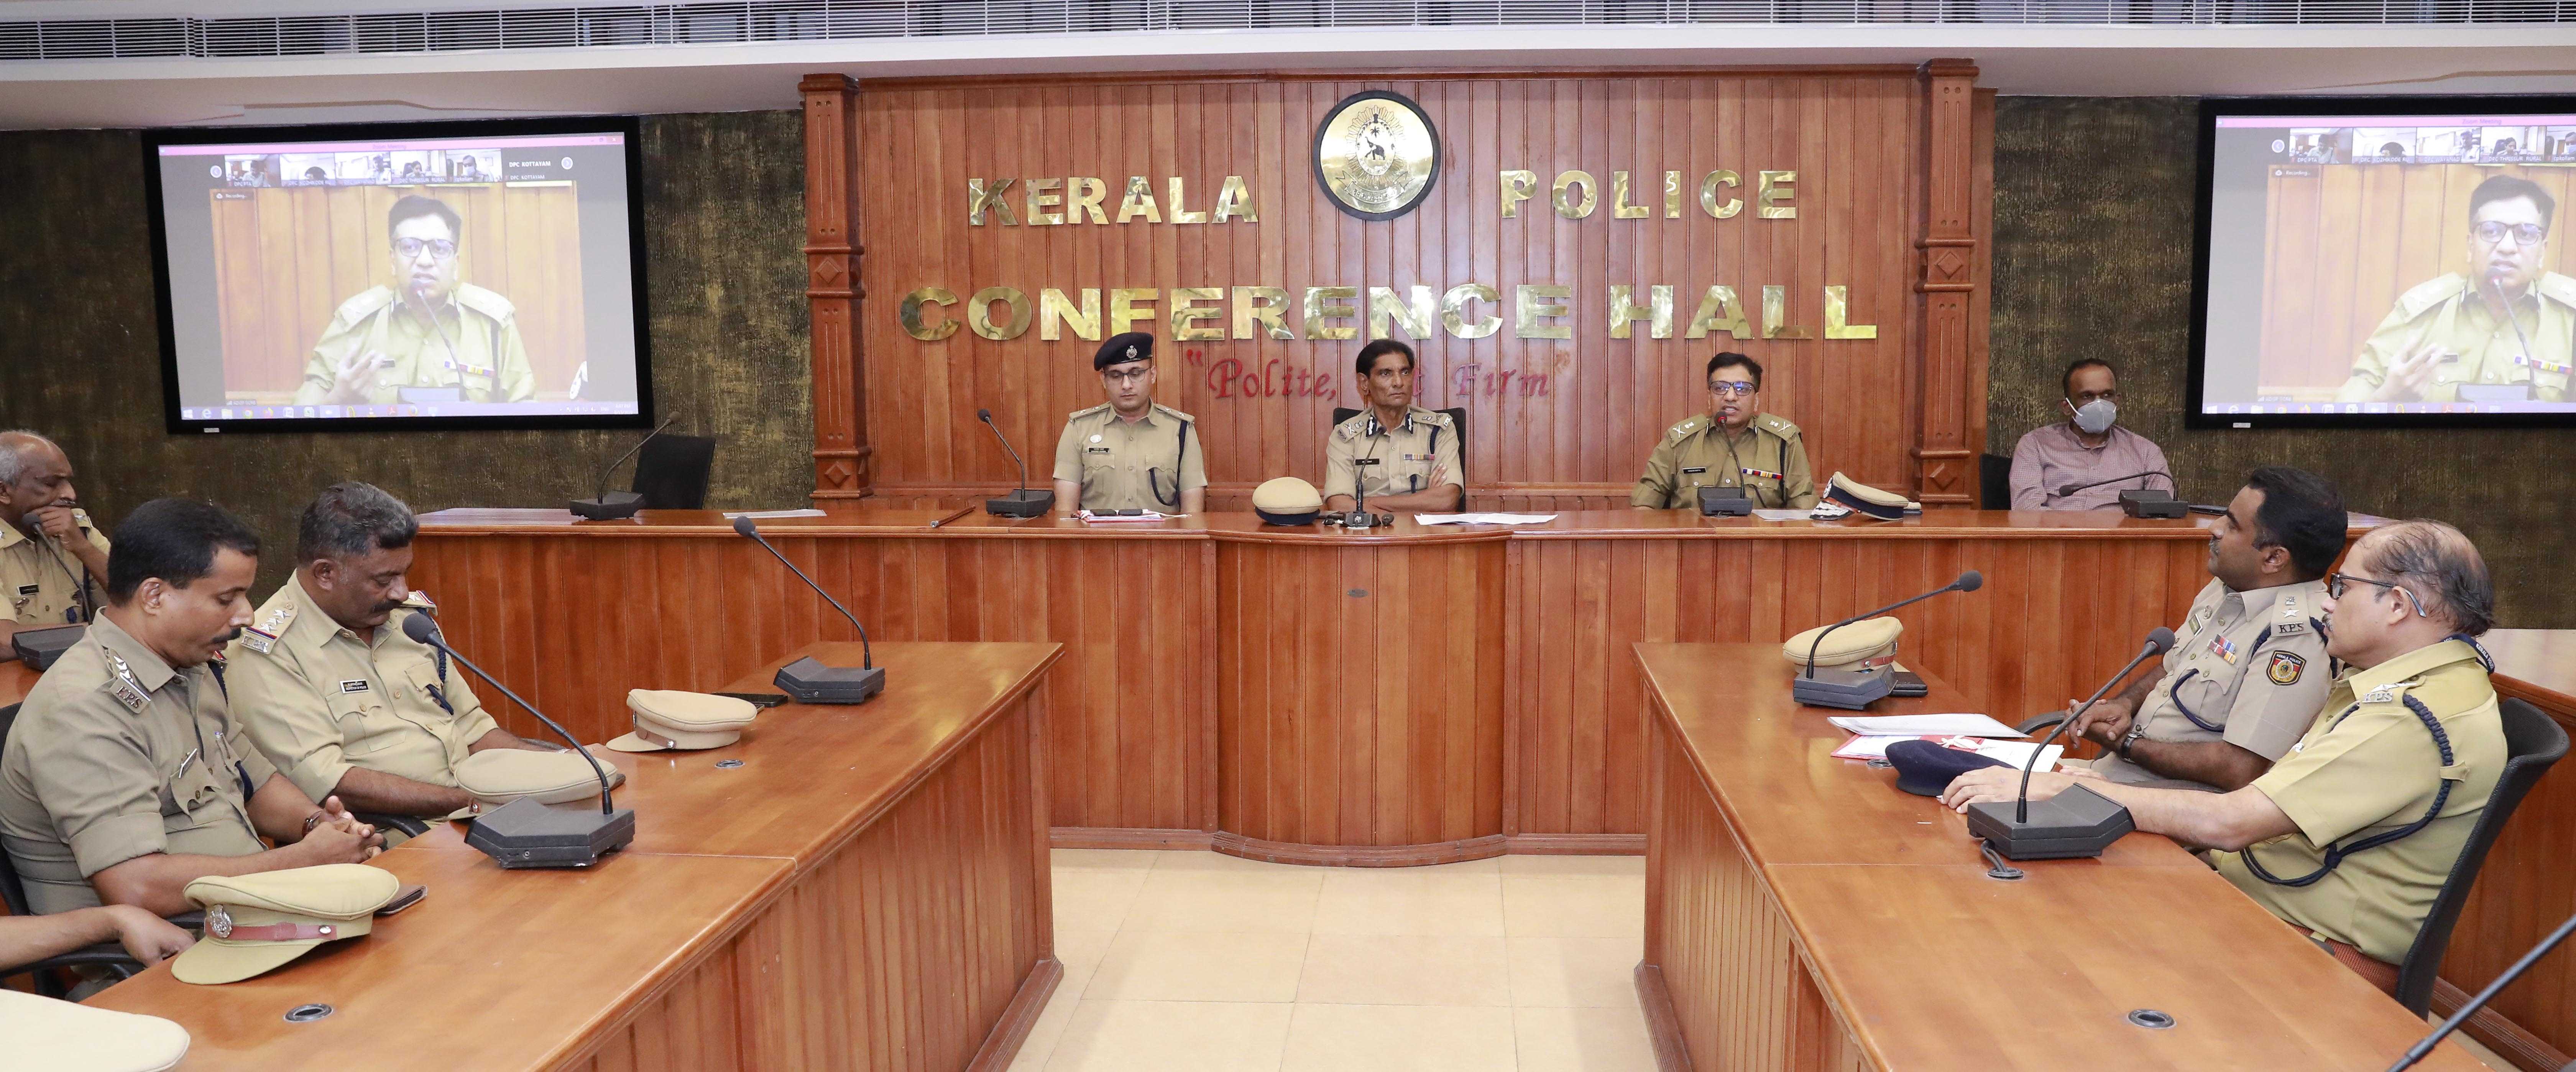 State Police Chief, Kerala launching the 20 new District Police Websites on 15/06/2022